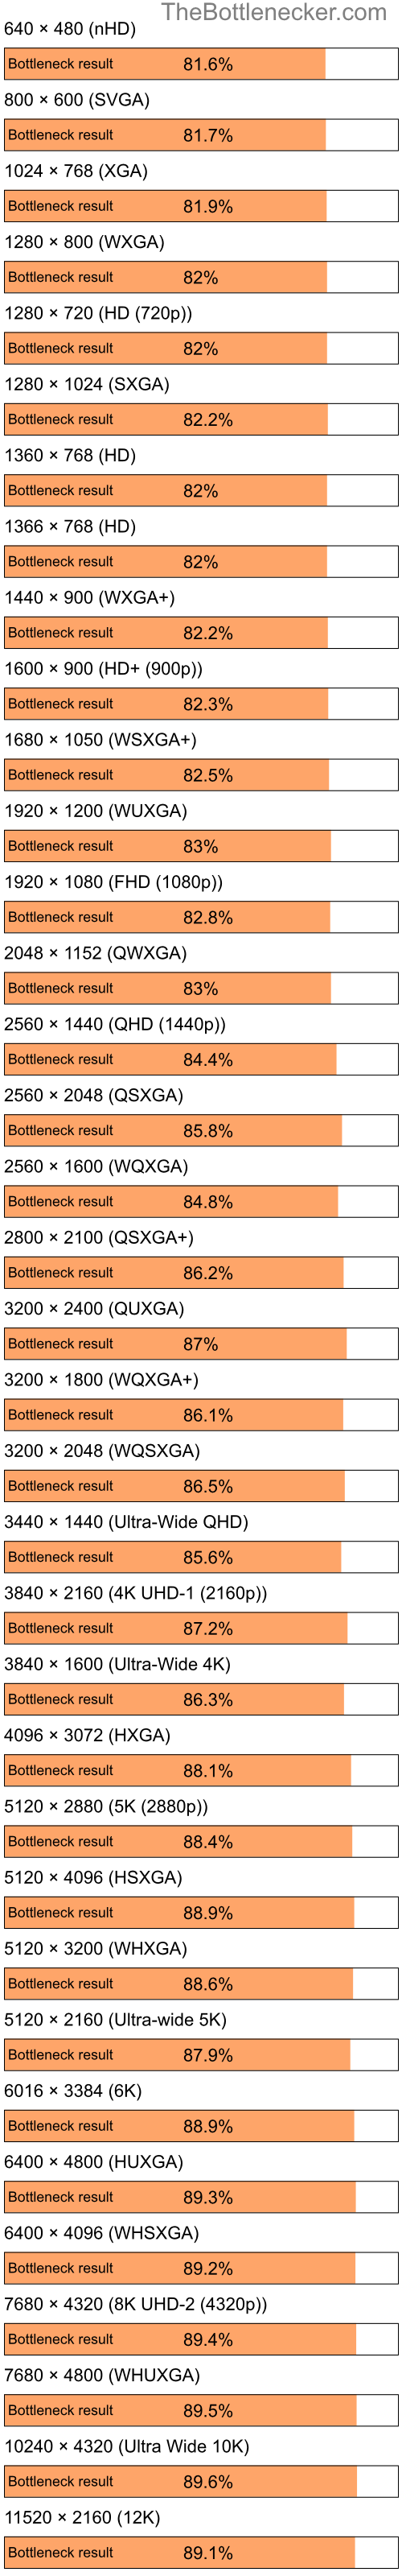 Bottleneck results by resolution for Intel Celeron and AMD Radeon 9550 in Graphic Card Intense Tasks